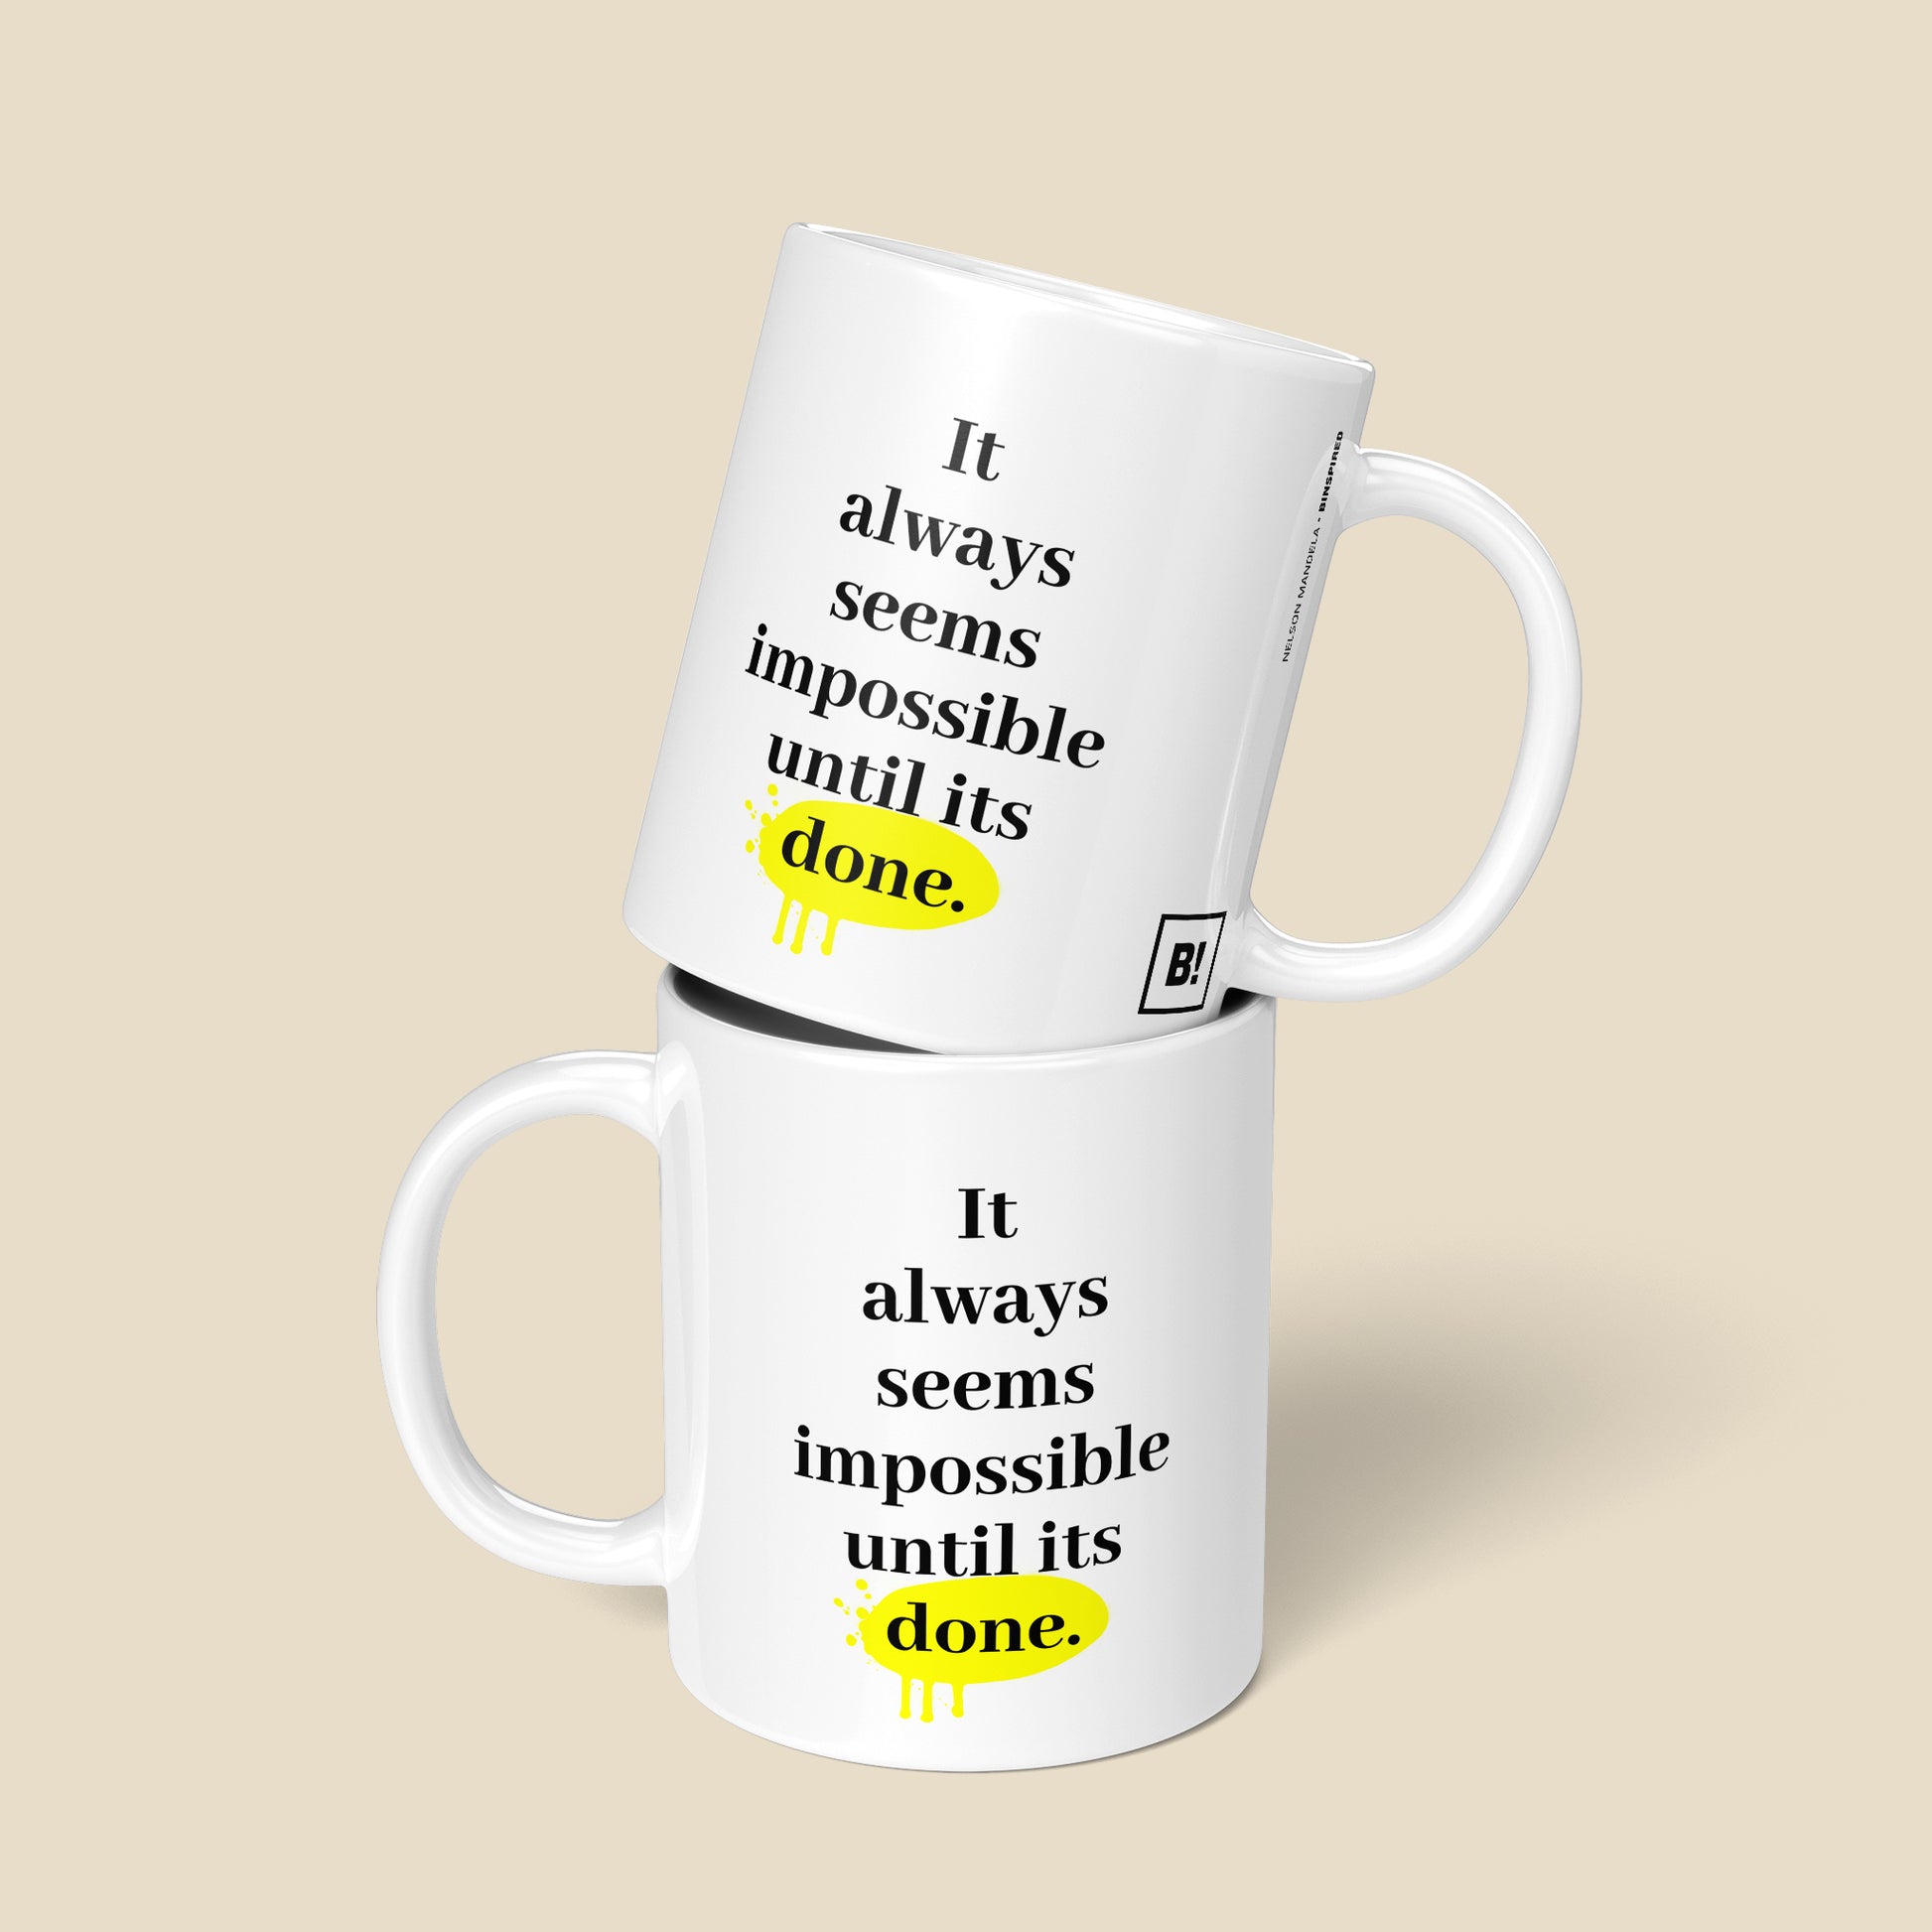 Be inspired by Nelson Mandela's famous quote, "It always seems impossible until it's done" on this 11oz white glossy coffee mug with a front and back view.